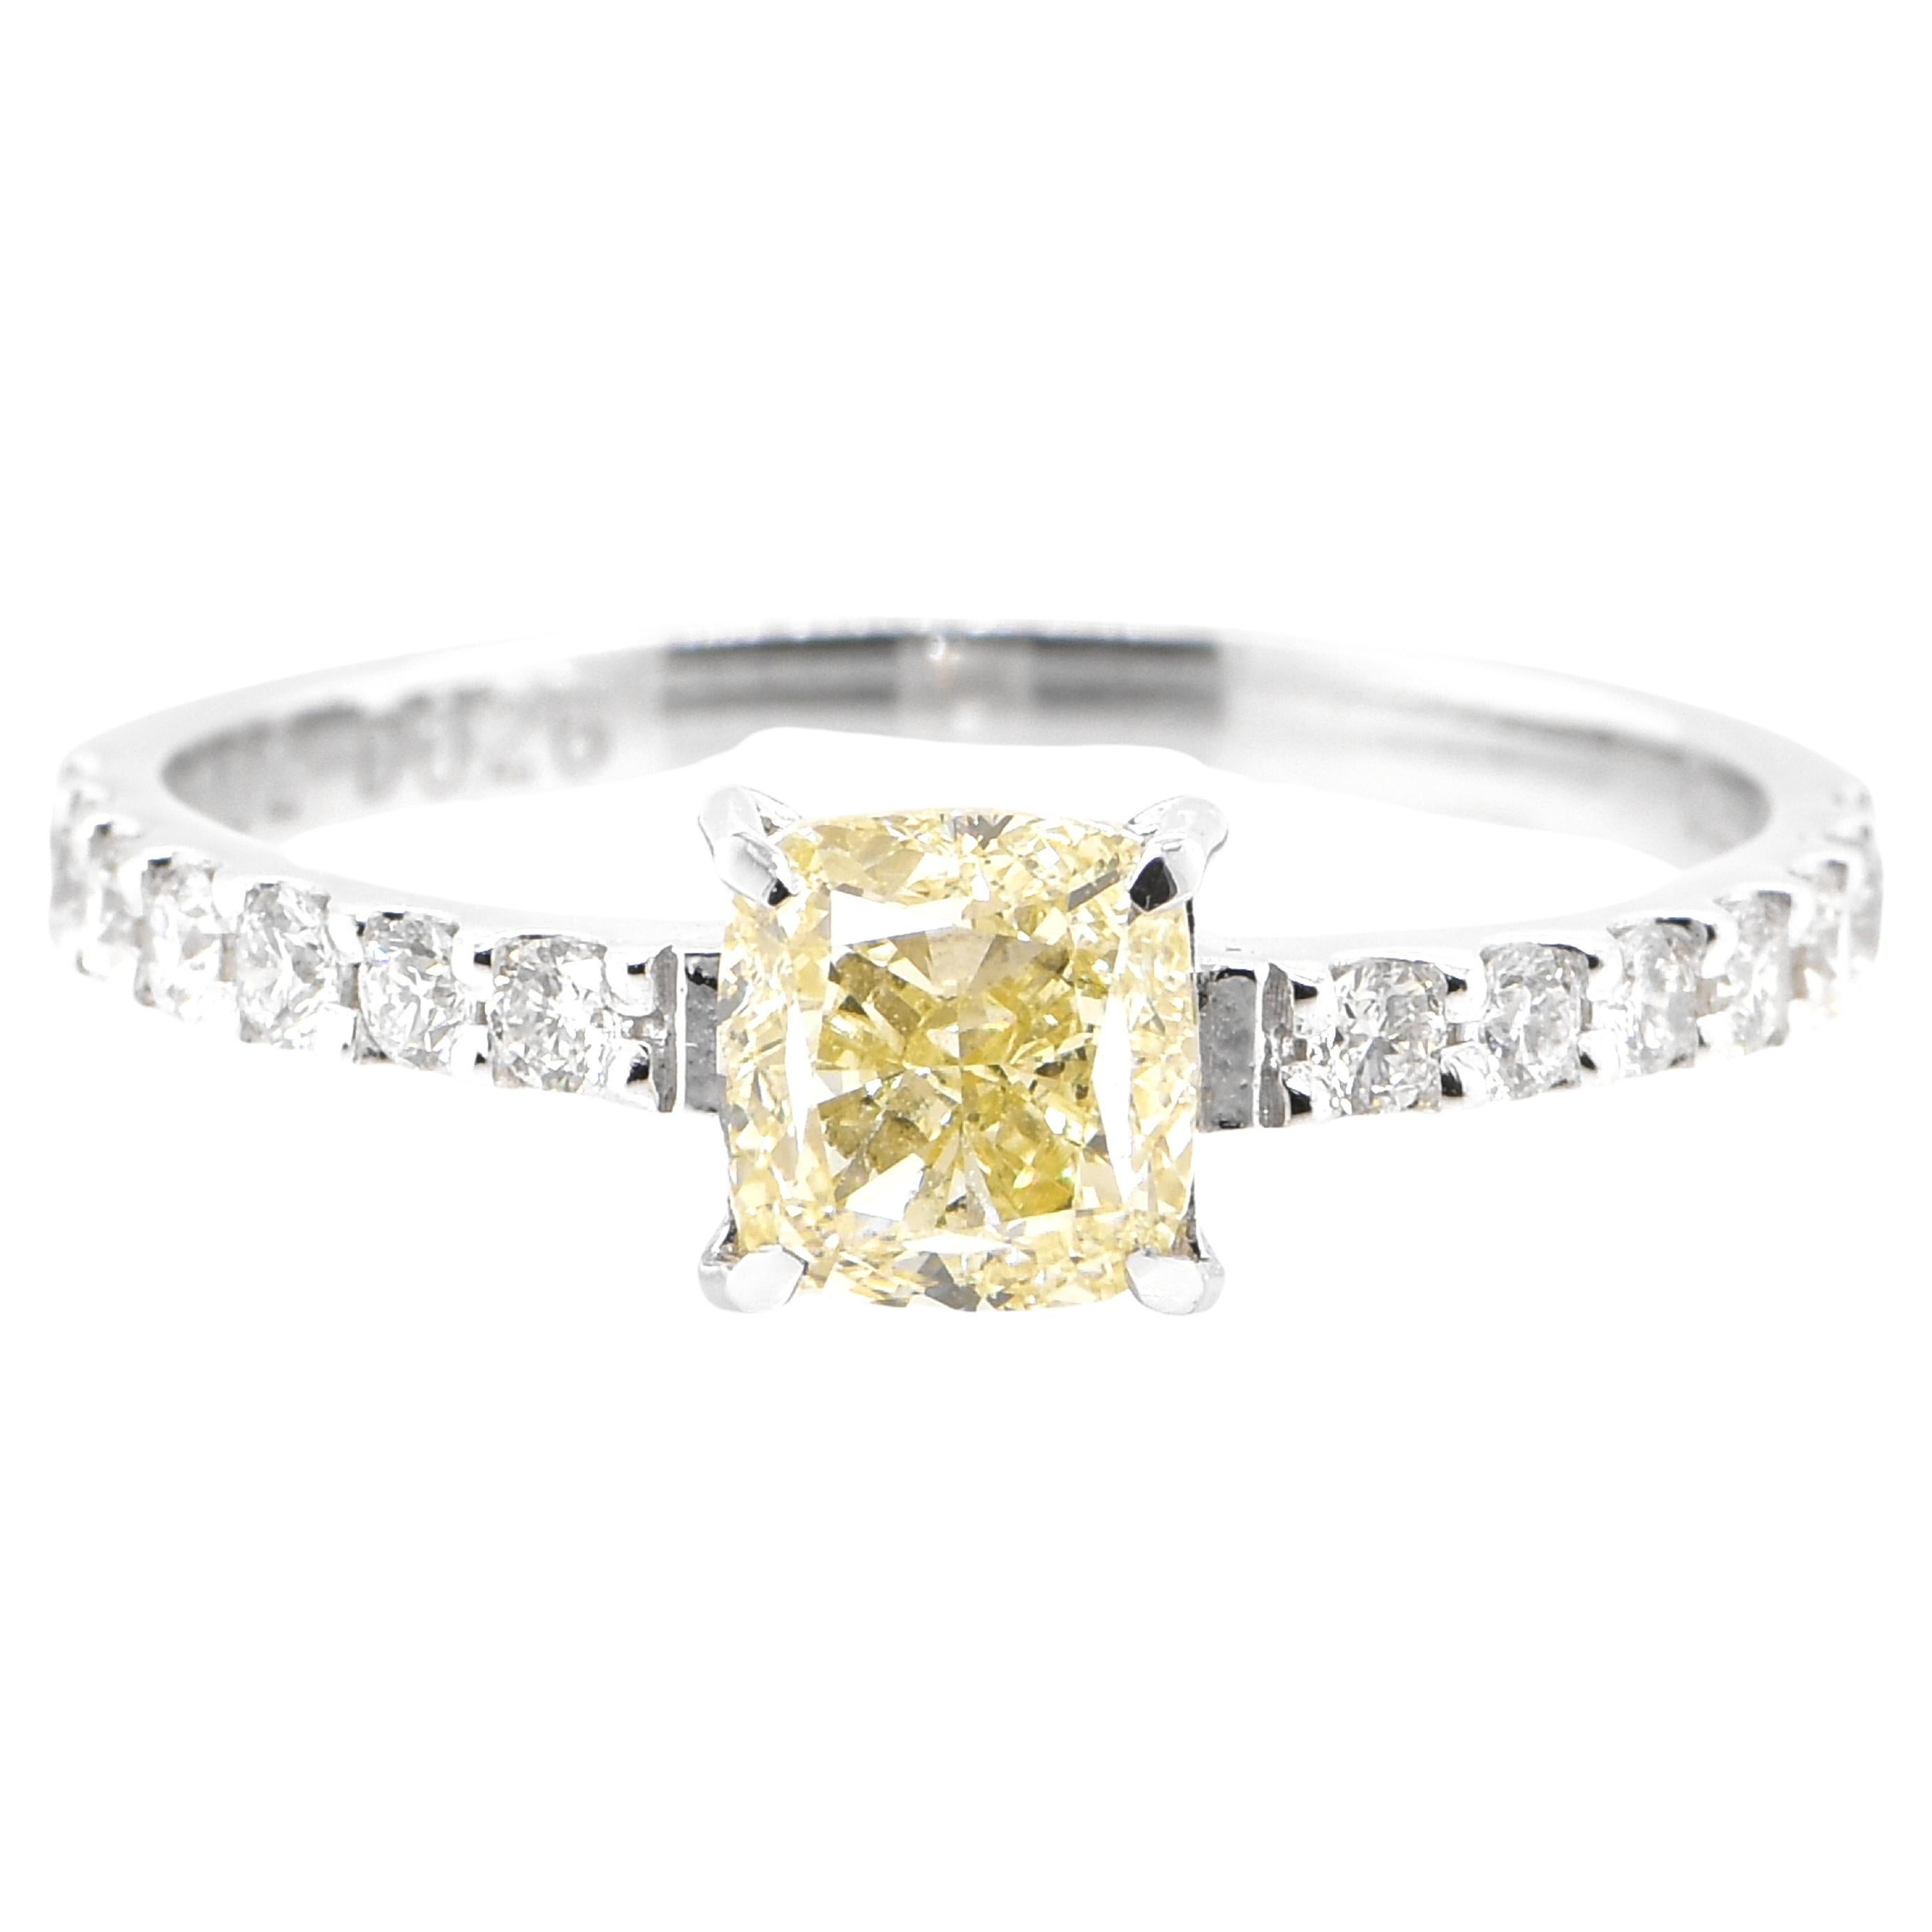 1.002 Carat, VS-1, Light Yellow, Earth-Mined Diamond Ring made in Platinum For Sale